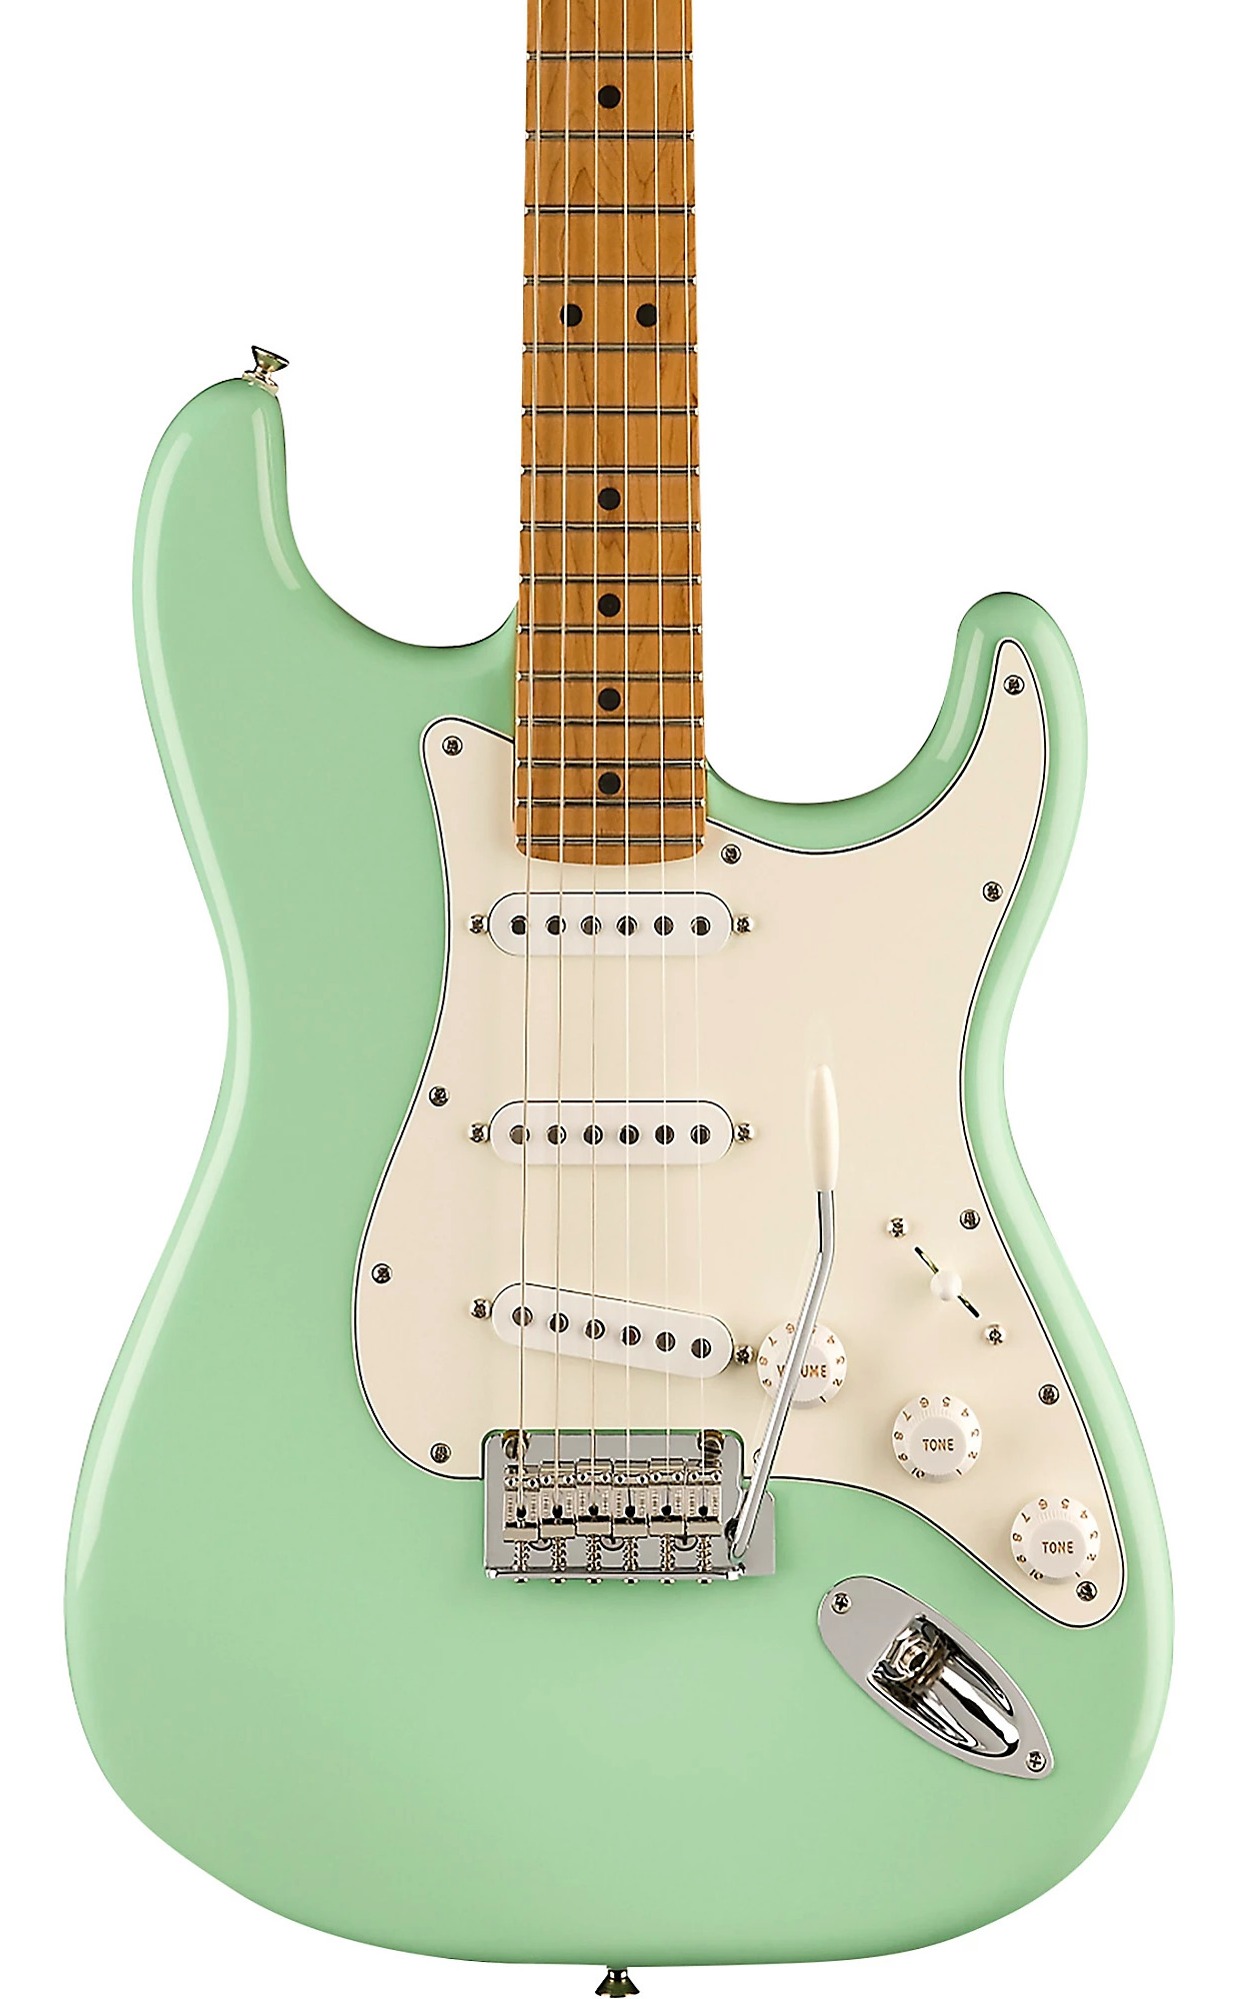 Fender Player Stratocaster Roasted Maple Fingerboard With Fat '50s Pickups Limited-Edition Electric Guitar in Surf Green or Red $649.99